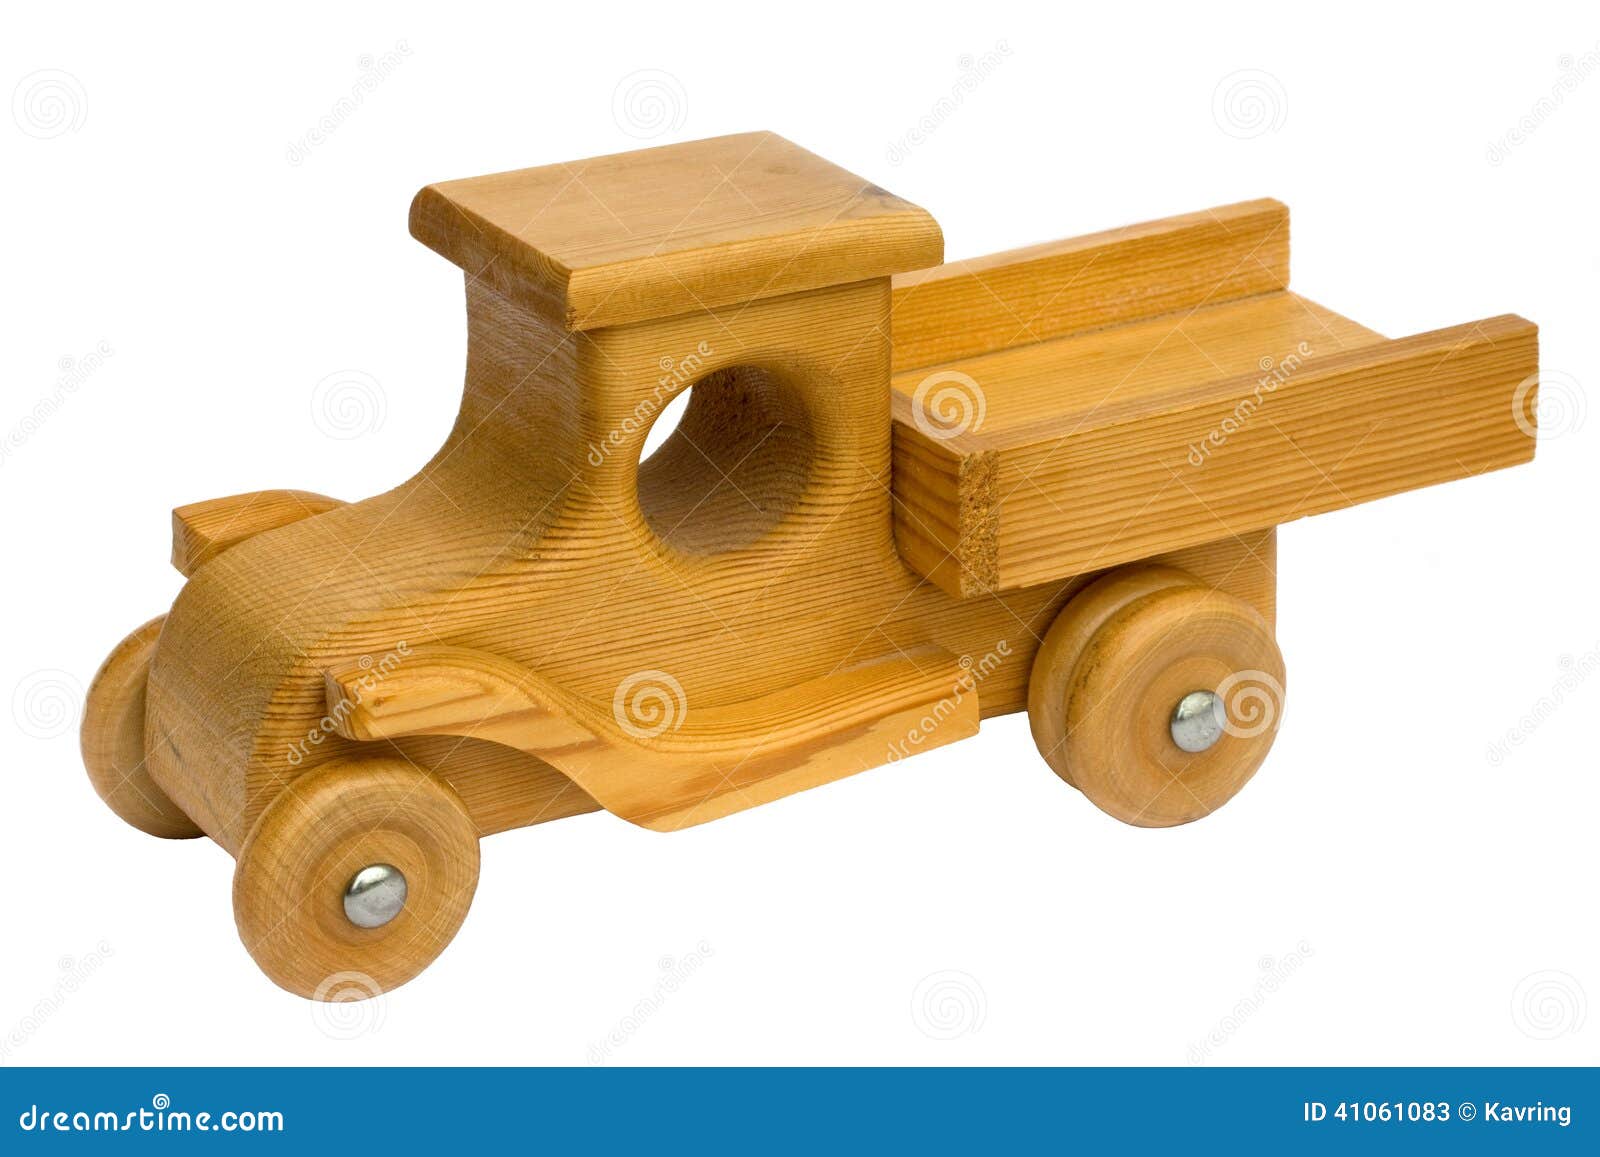 Old homemade wooden toy truck isolated on white.